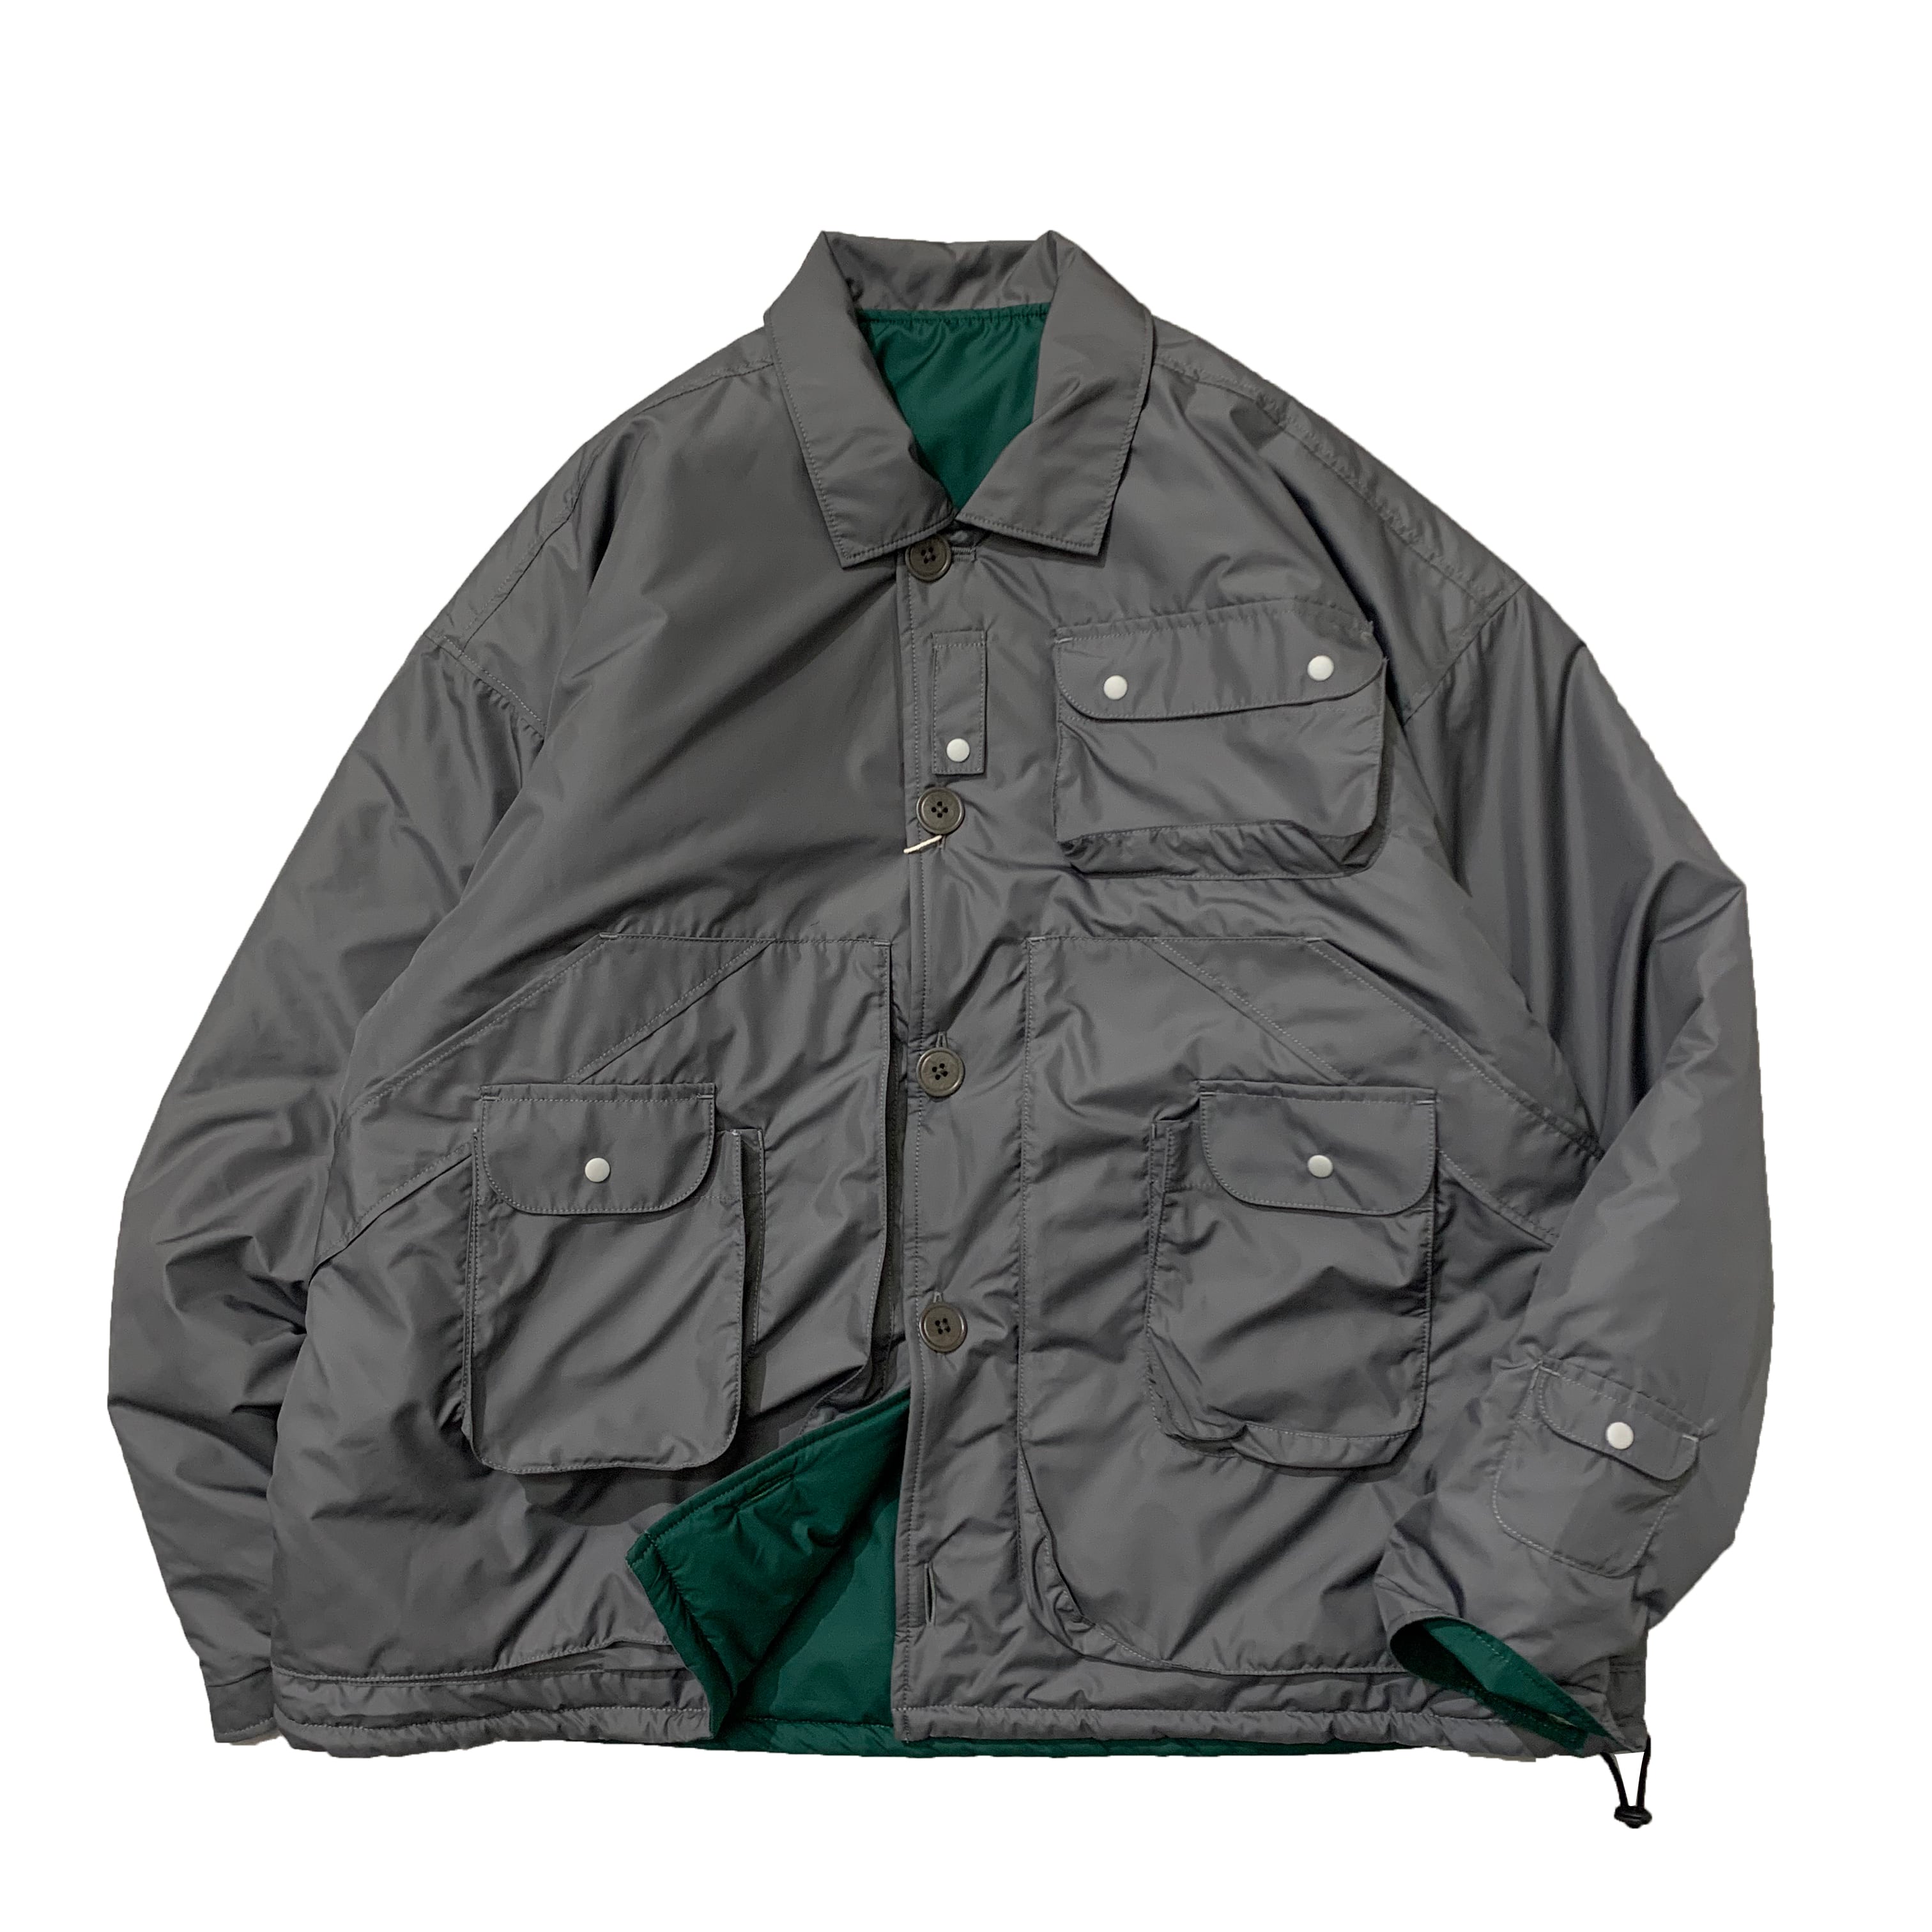 NOROLL / TWO FACE JACKET -GREY x GREEN- | THE NEWAGE CLUB powered by BASE